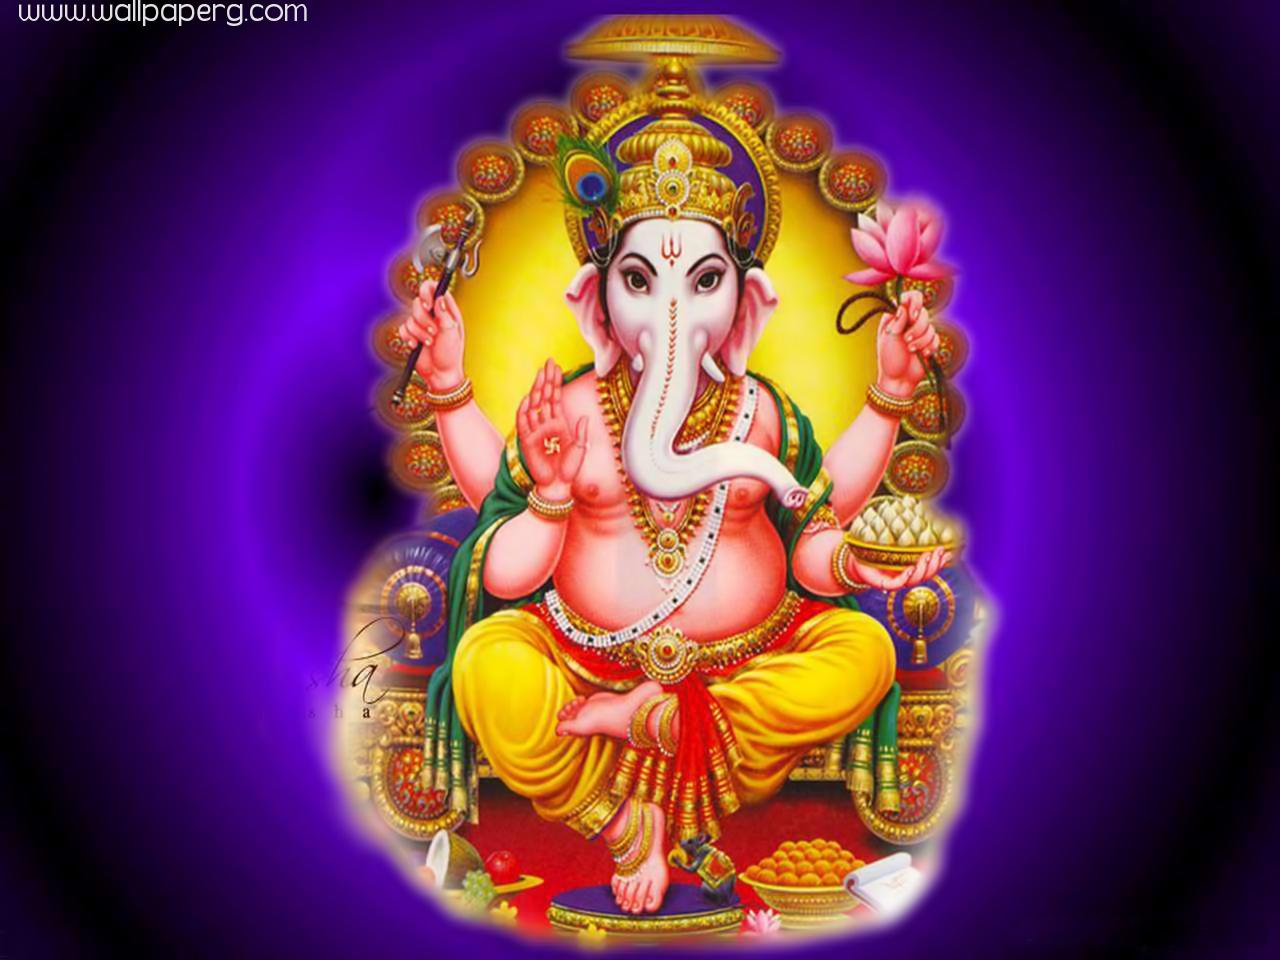 Download Picture of ganpati ji - Ganesh chaturthi images for your mobile  cell phone